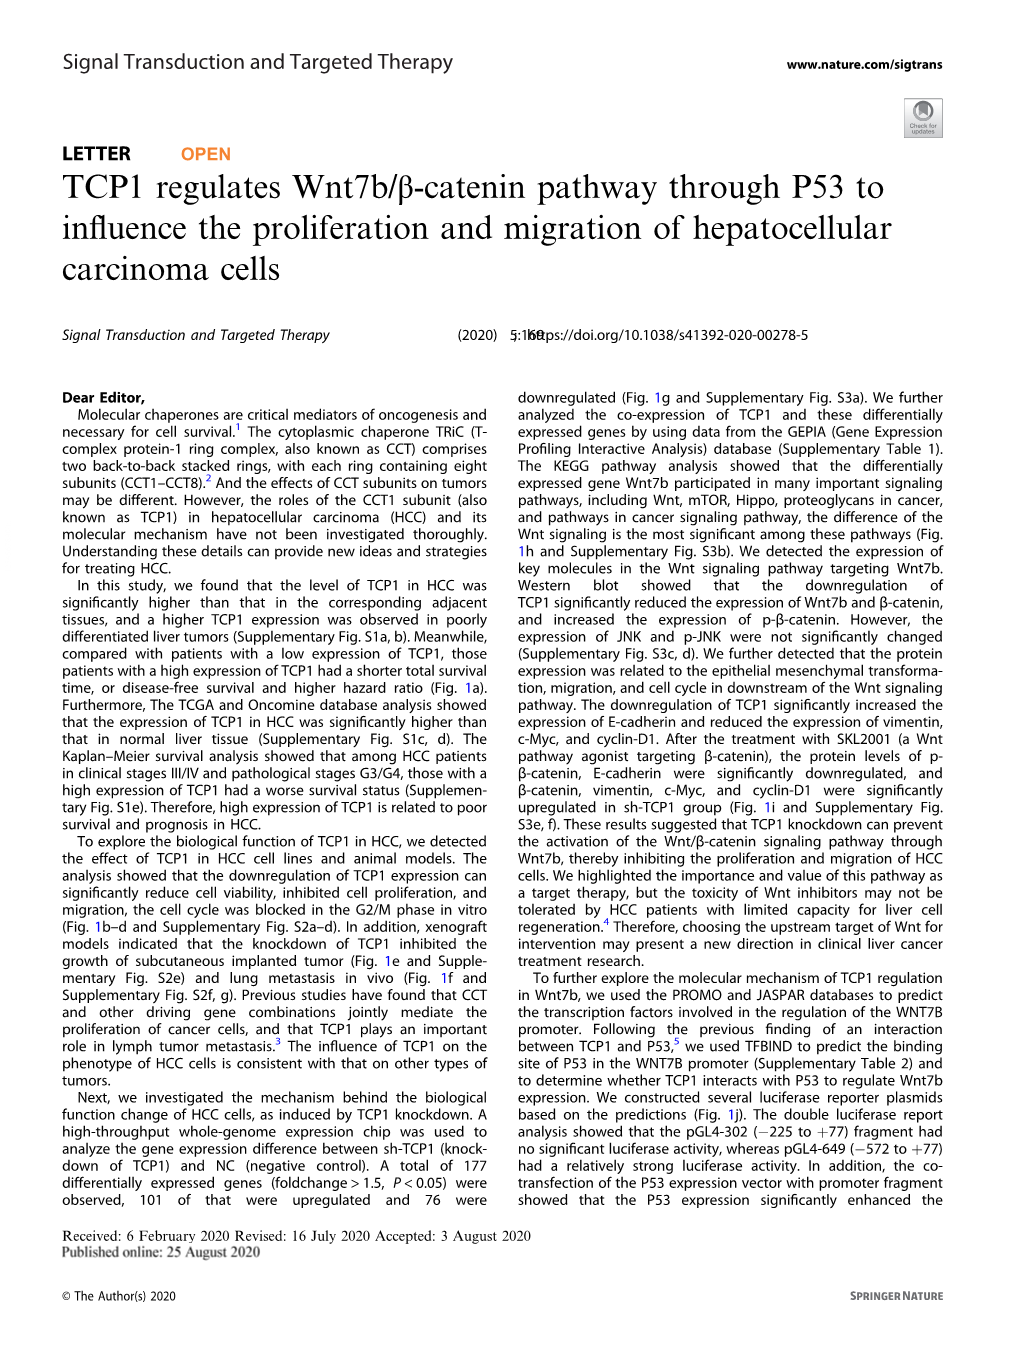 TCP1 Regulates Wnt7b/Β-Catenin Pathway Through P53 to Inﬂuence the Proliferation and Migration of Hepatocellular Carcinoma Cells